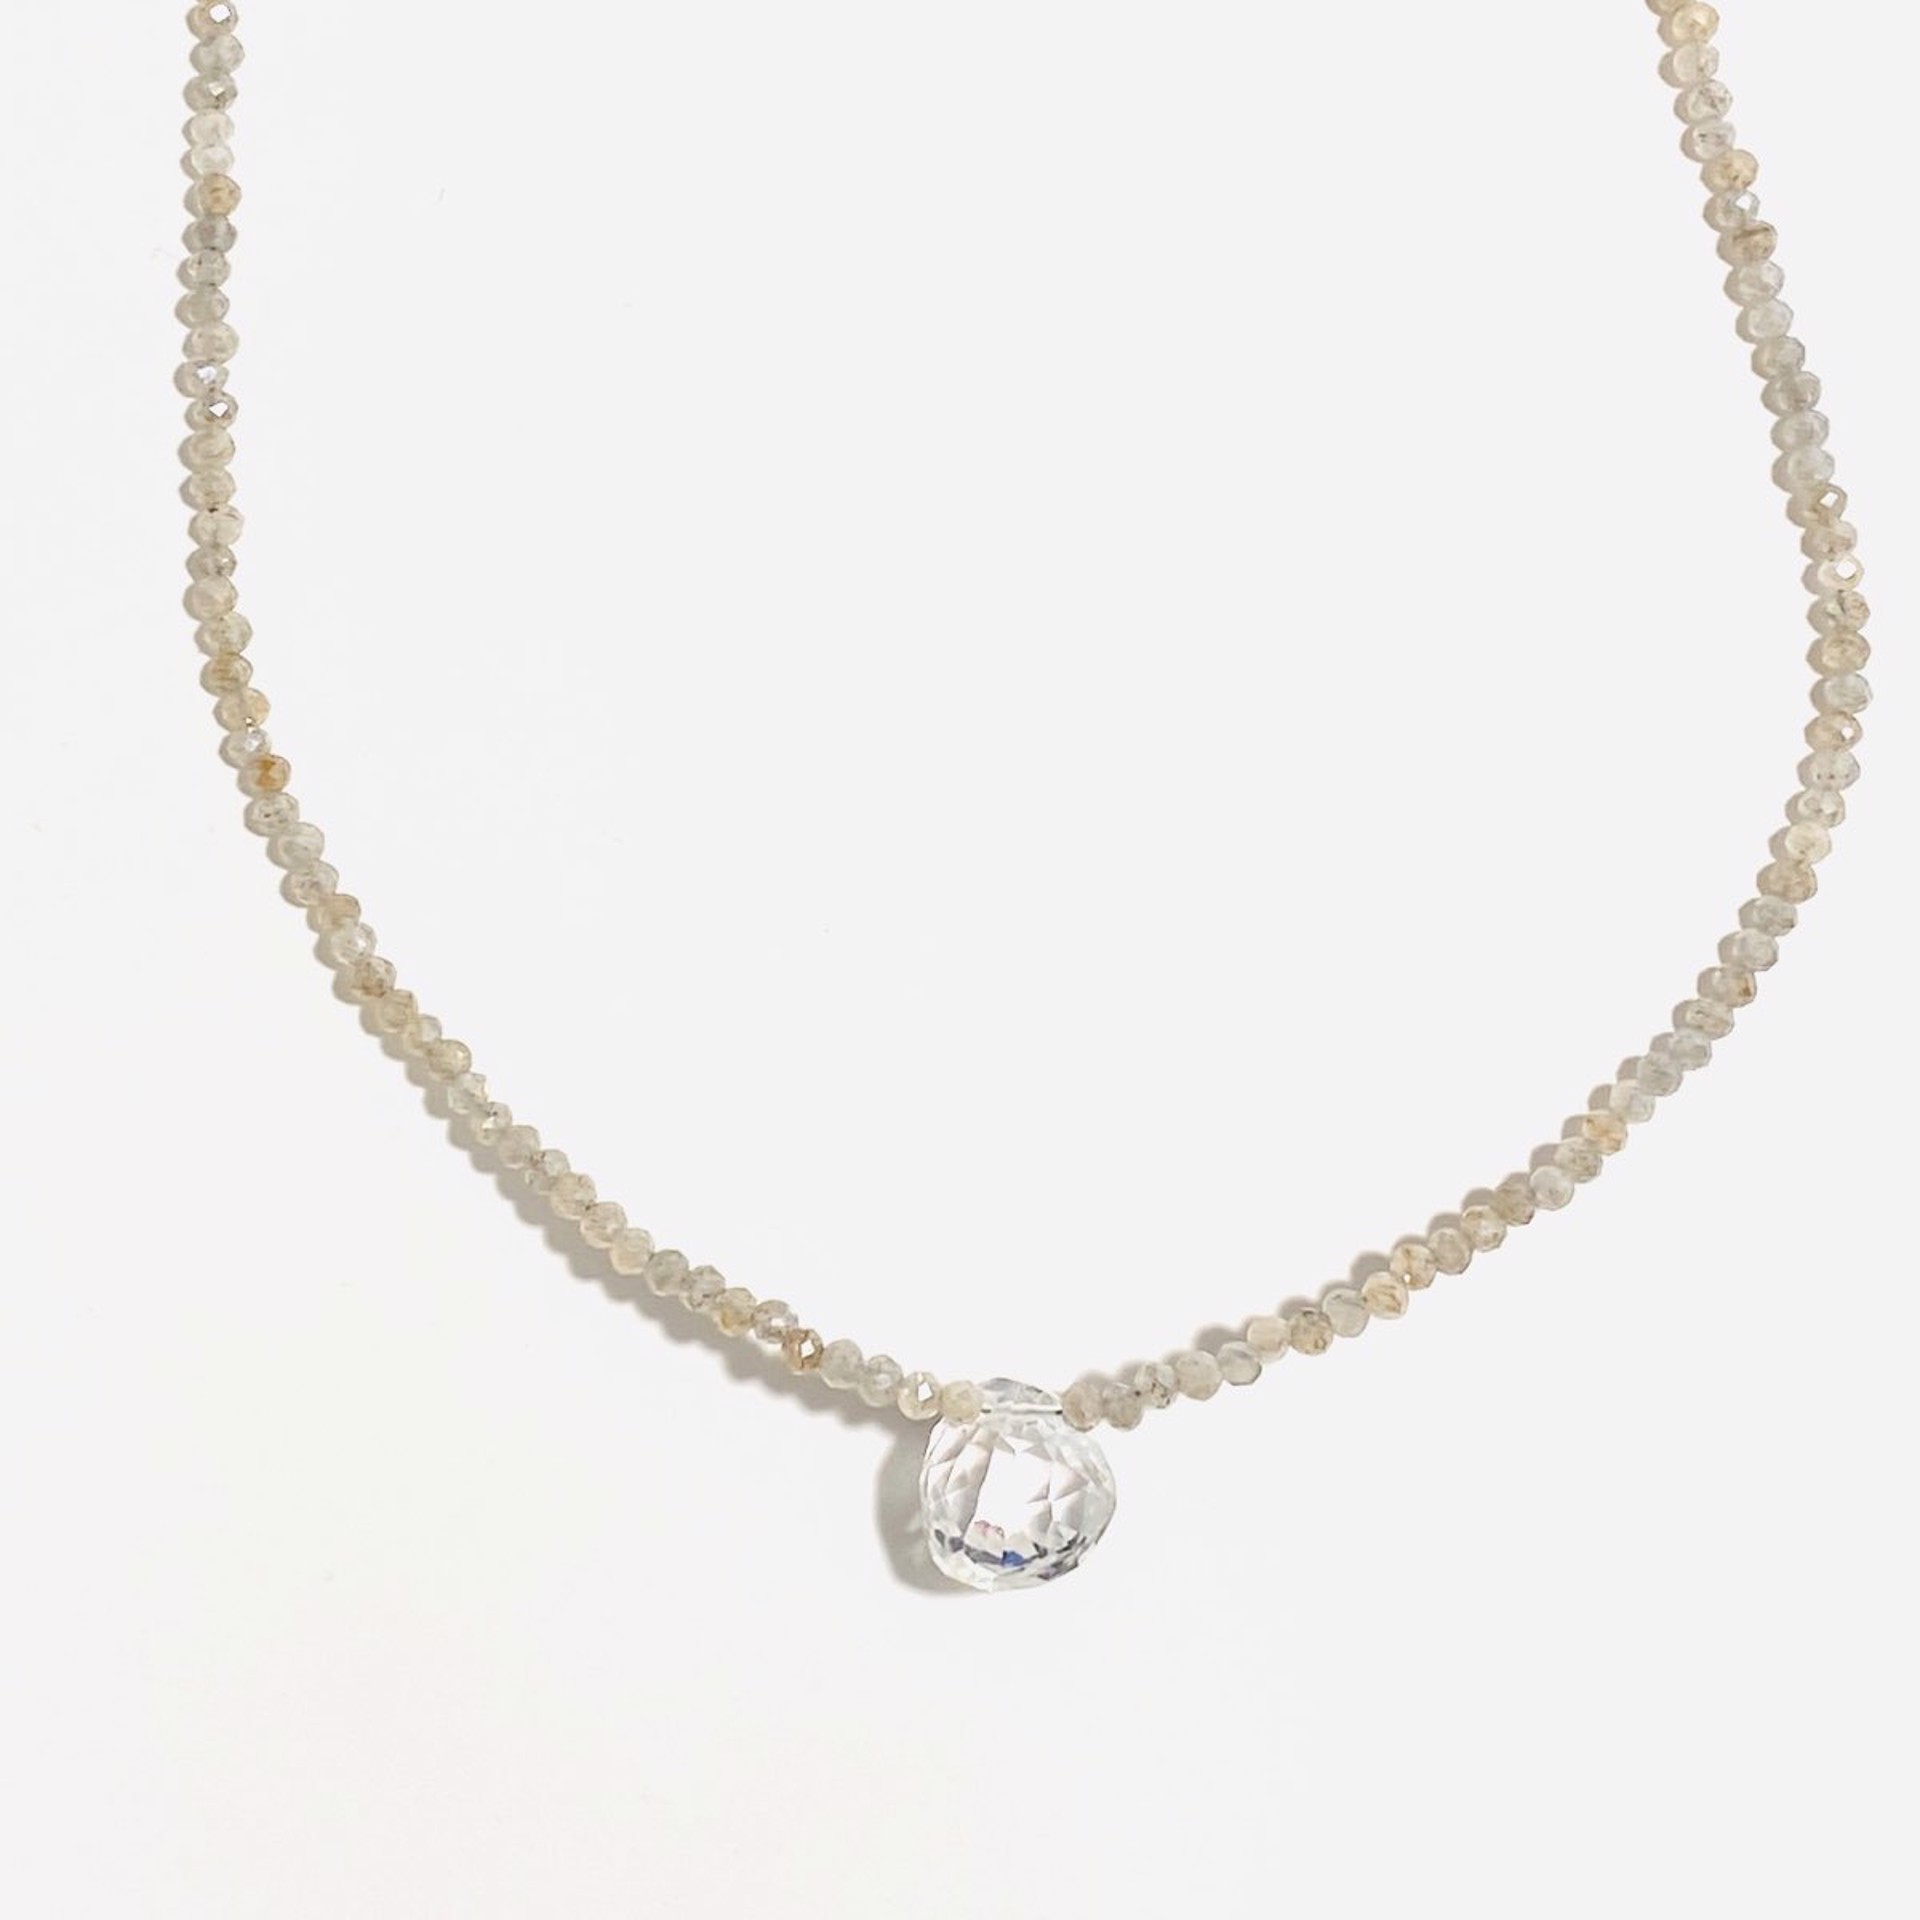 Faceted Tiny Labraddorite Faceted Quartz Drop Necklace by Nance Trueworthy